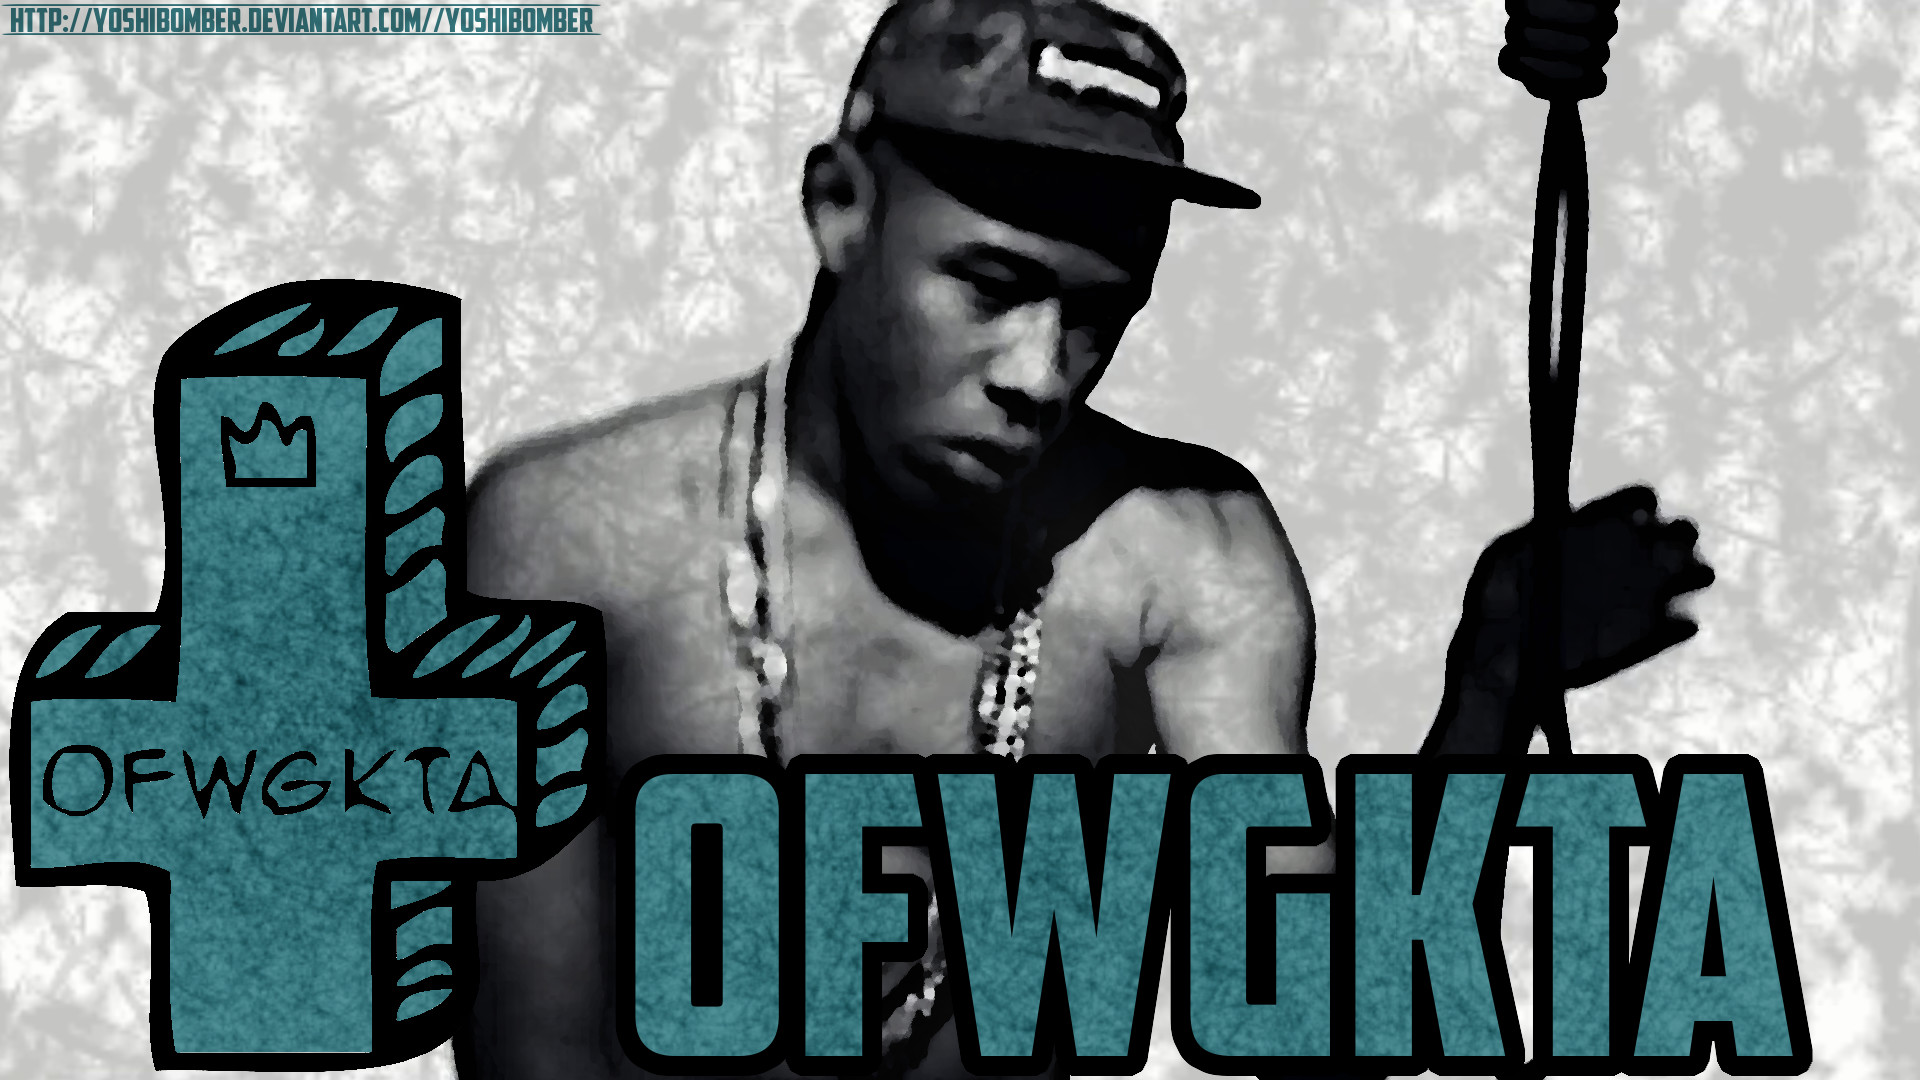 1920x1080 13 HD Odd Future Desktop Wallpapers For Free Download